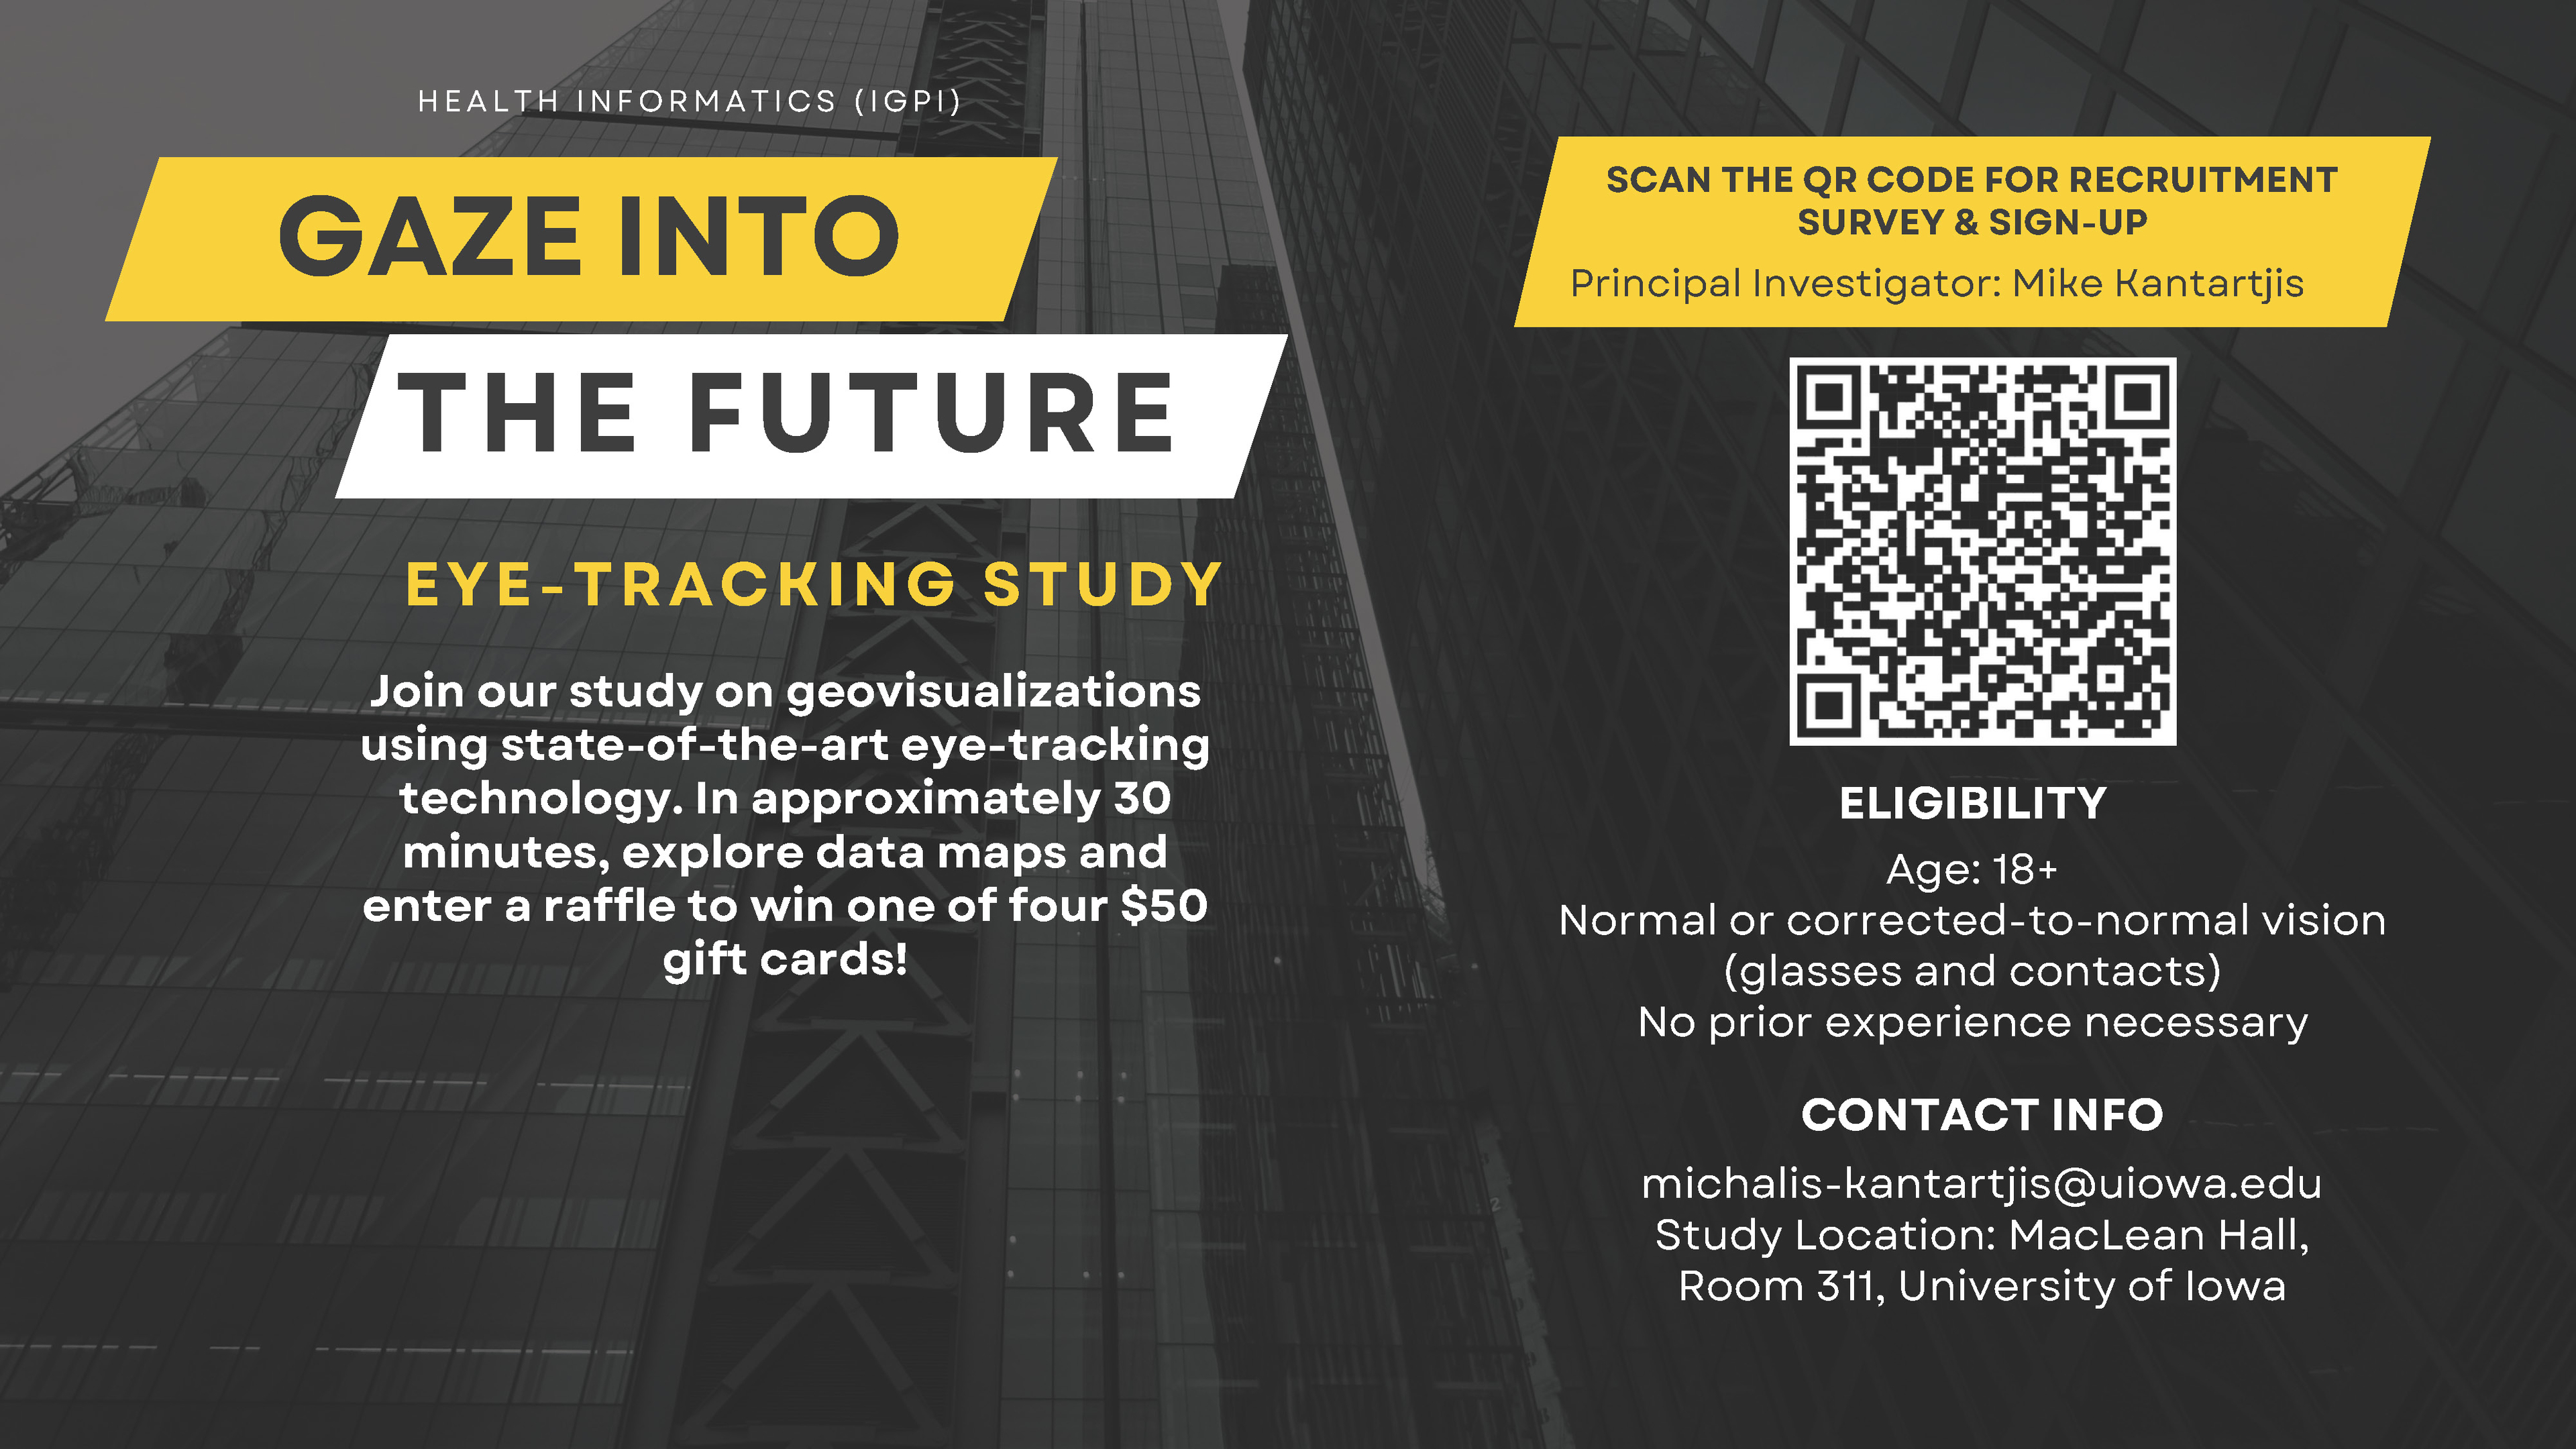 SCAN THE QR CODE FOR RECRUITMENT SURVEY & SIGN-UP Principal Investigator: Mike Kantartjis GAZE INTO THE FUTURE H E A L T H I N F O R M A T I C S ( I G P I ) EYE-TRACKING STUDY CONTACT INFO michalis-kantartjis@uiowa.edu Study Location: MacLean Hall, Room 311, University of Iowa Join our study on geovisualizations using state-of-the-art eye-tracking technology. In approximately 30 minutes, explore data maps and enter a raffle to win one of four $50 gift cards! ELIGIBILITY Age: 18+ Normal or corrected-to-normal vision (glasses and contacts) No prior experience necessary